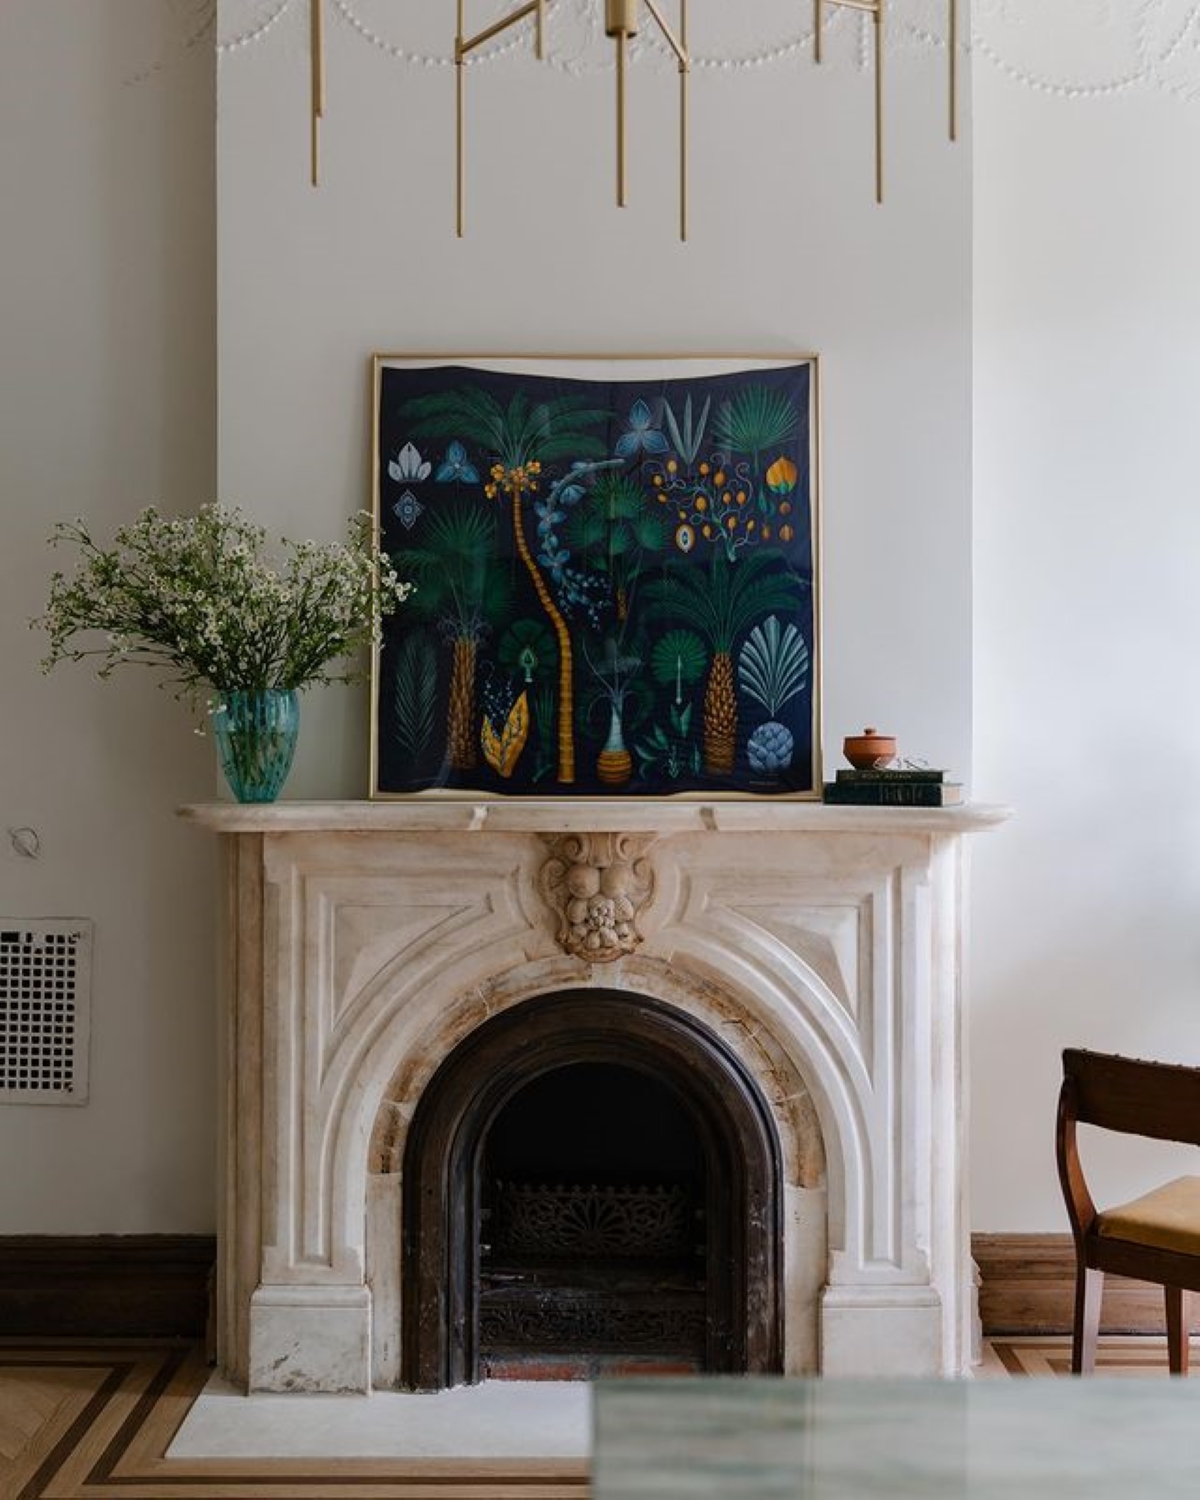 Fireplace with large painting on mantel.